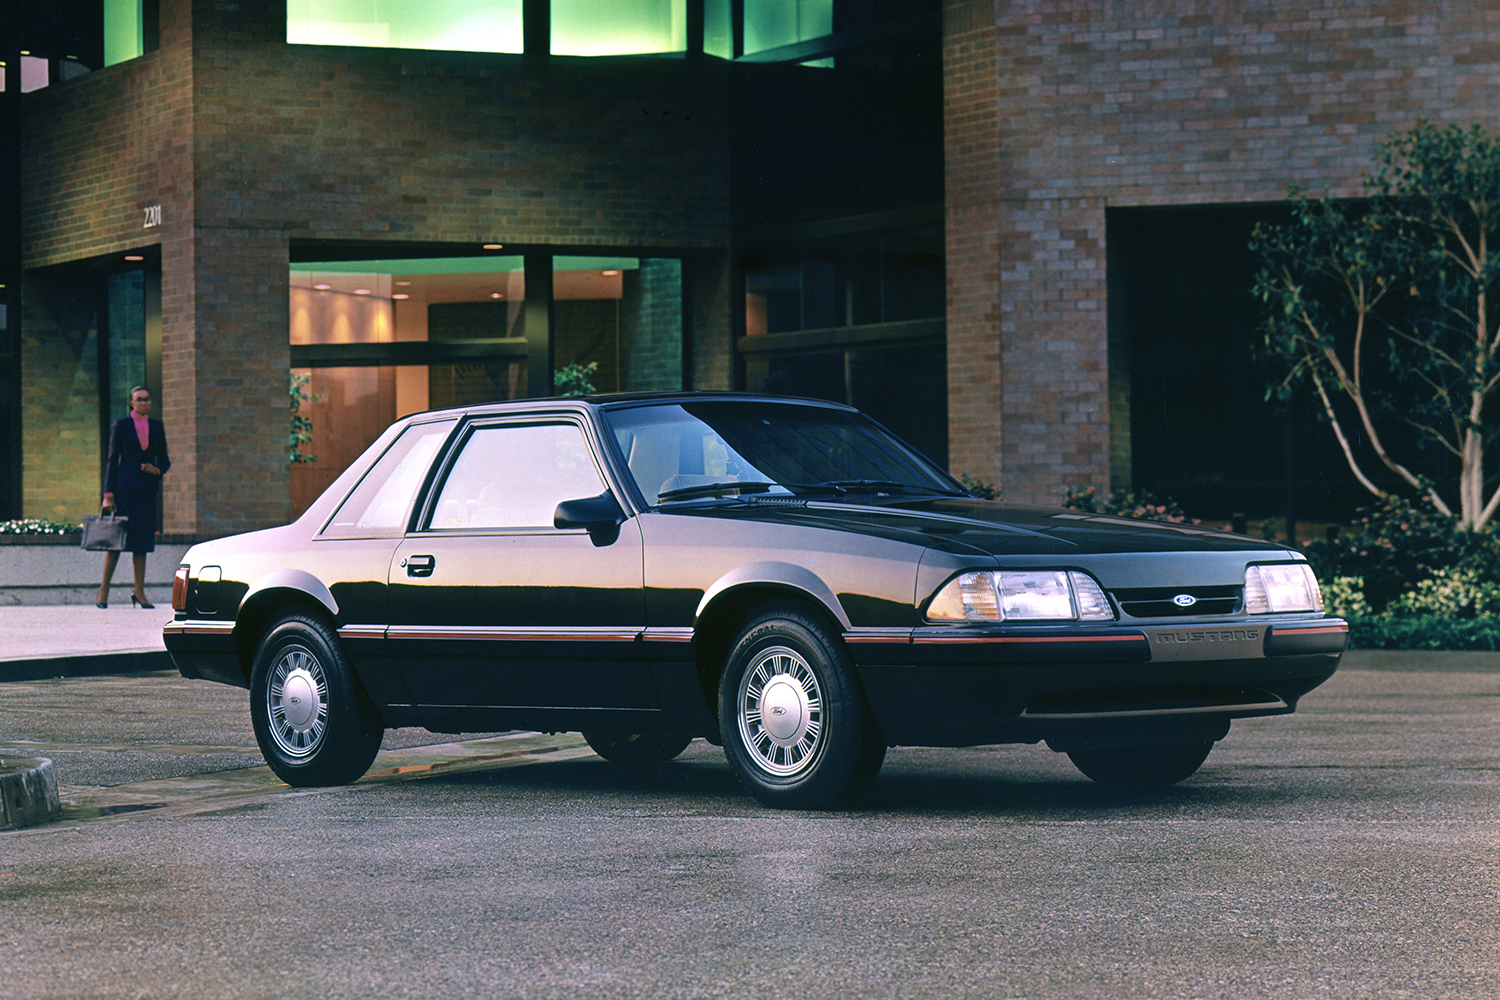 A 1988 Ford Mustang LX with a woman standing in the background.  The Mustang 5.0 is now considered a modern classic car.